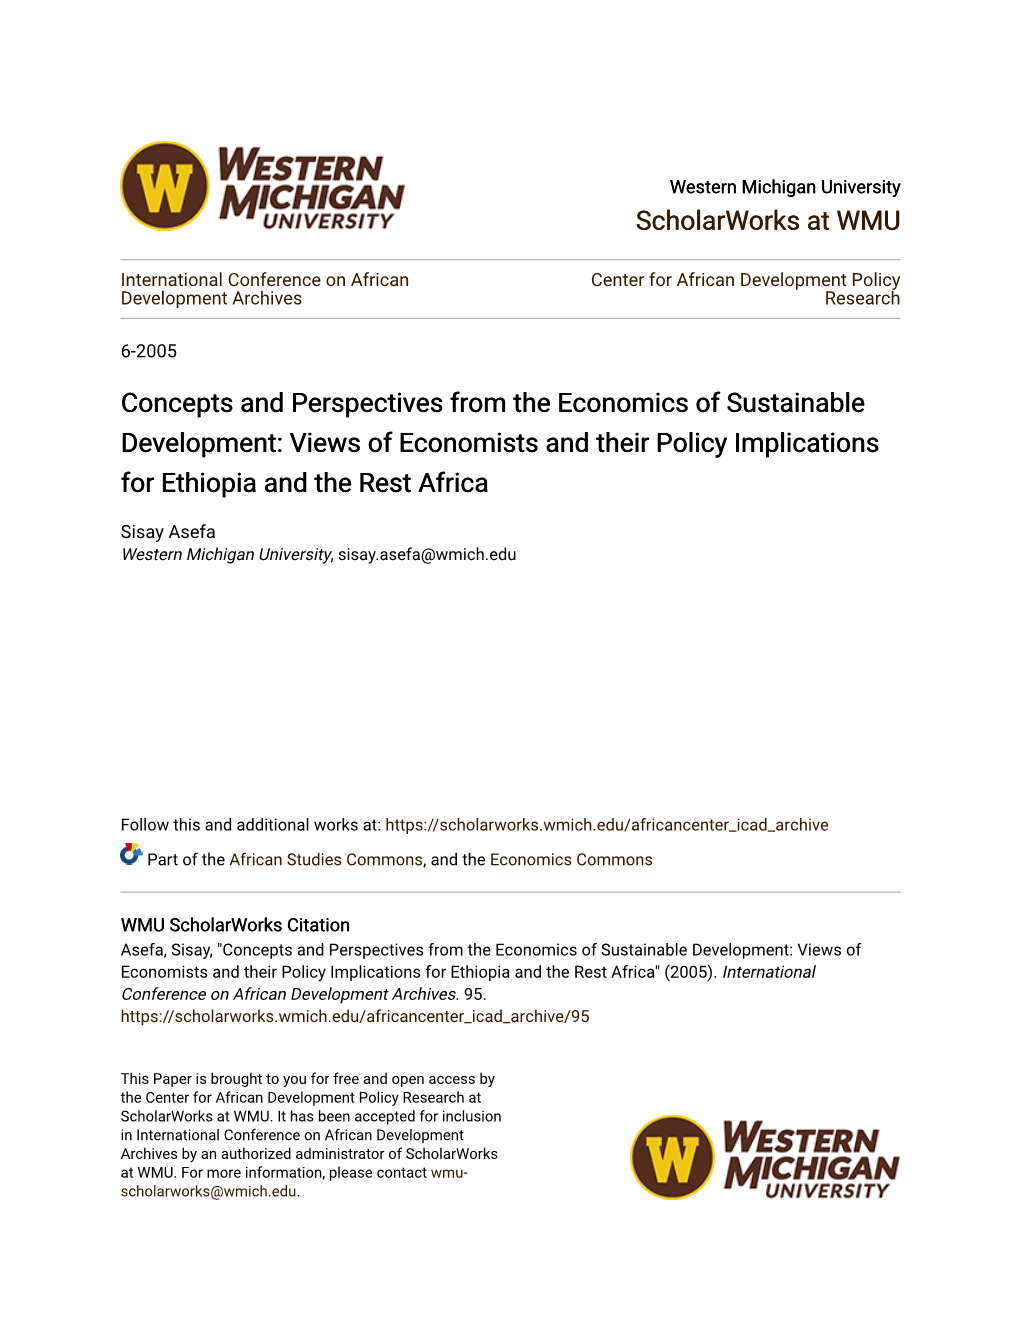 Concepts and Perspectives from the Economics of Sustainable Development: Views of Economists and Their Policy Implications for Ethiopia and the Rest Africa